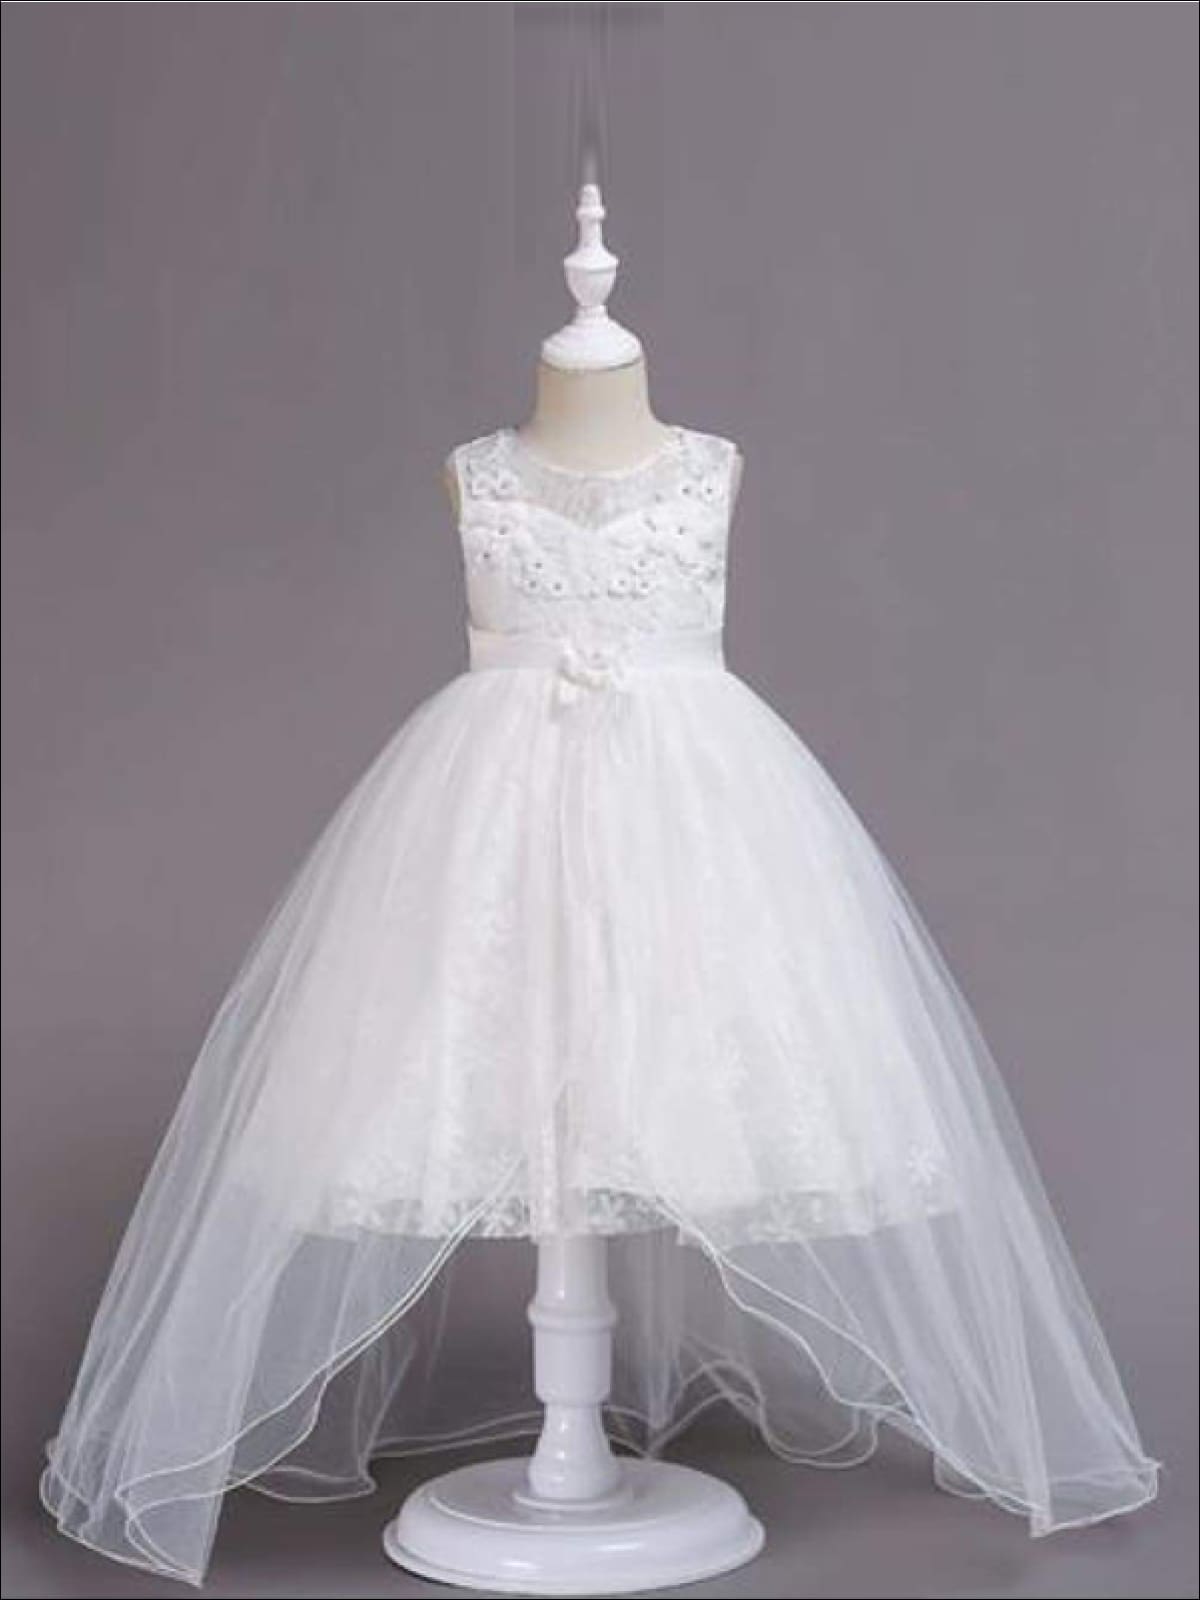 Girls Exquisite Tulle & Lace Floral Applique Holiday Dress - White / 3T - Girls Fall Dressy Dress